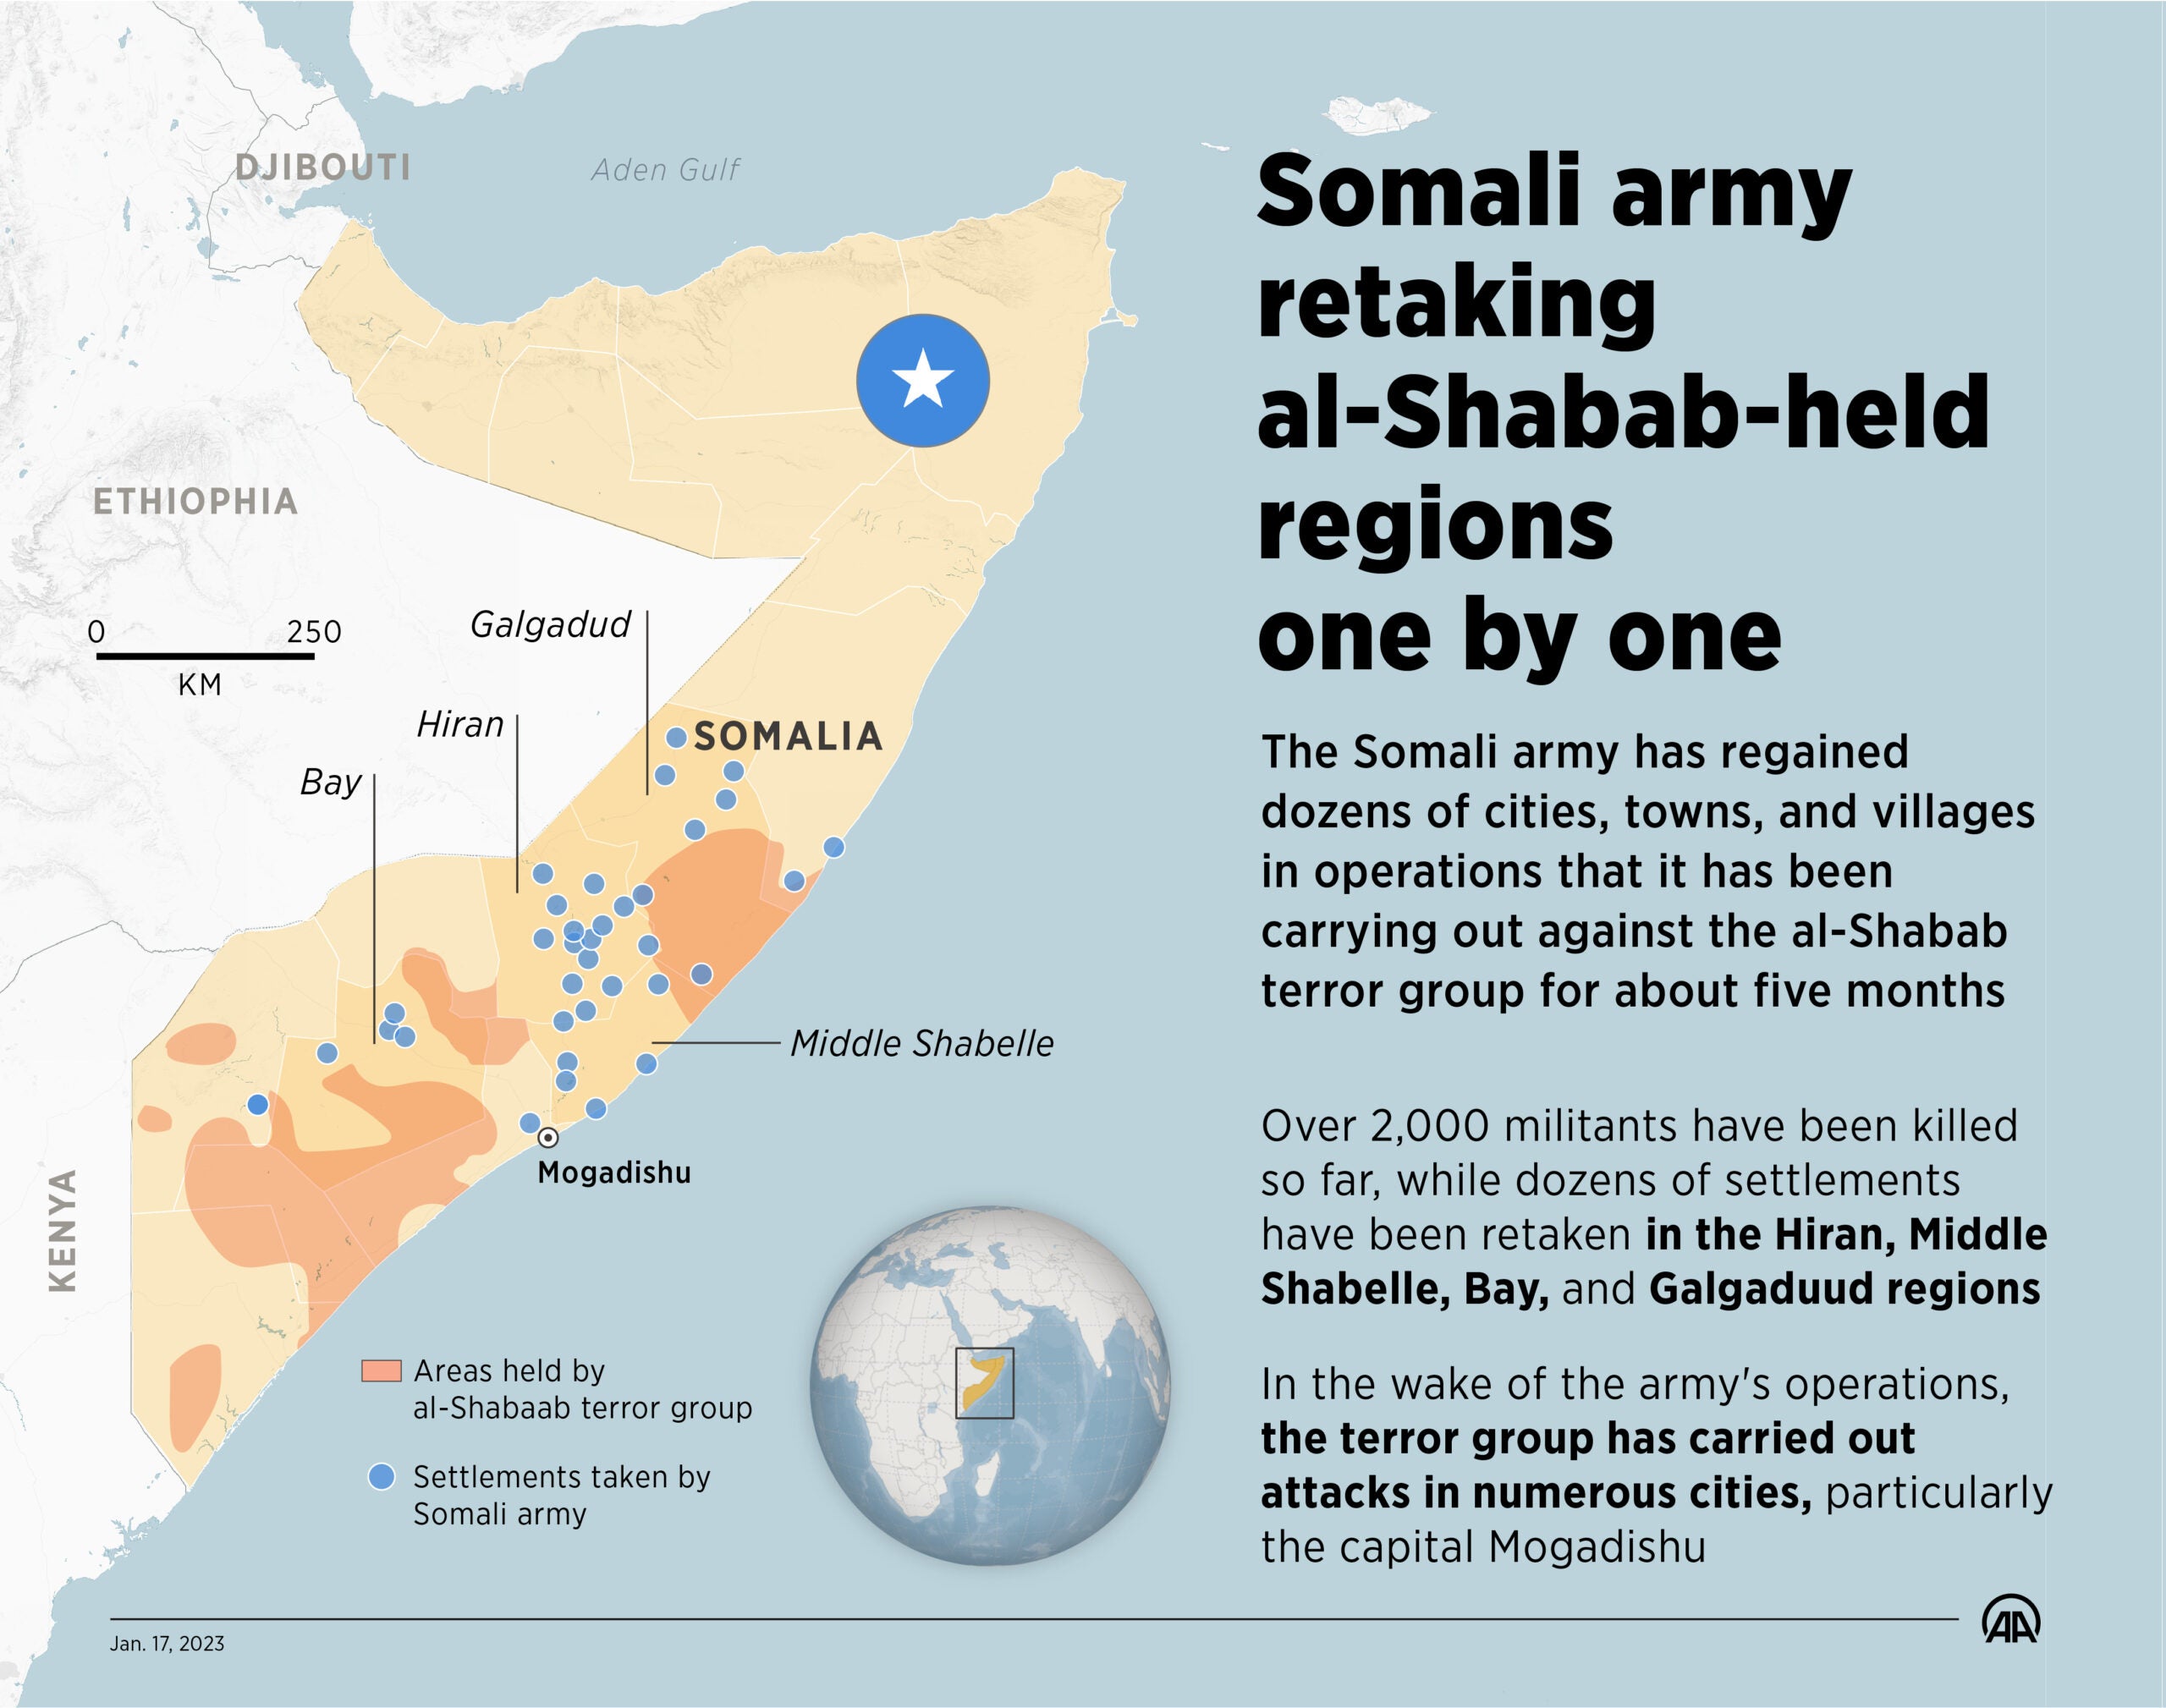 ANKARA, TURKIYE - JANUARY 16: An infographic titled "Somali army retaking al-Shabab-held regions one by one" created in Ankara, Turkiye on January 16, 2023. The Somali army has regained dozens of cities, towns, and villages in operations that it has been carrying out against the al-Shabab terror group for about five months. (Photo by Elmurod Usubaliev/Anadolu Agency via Getty Images)